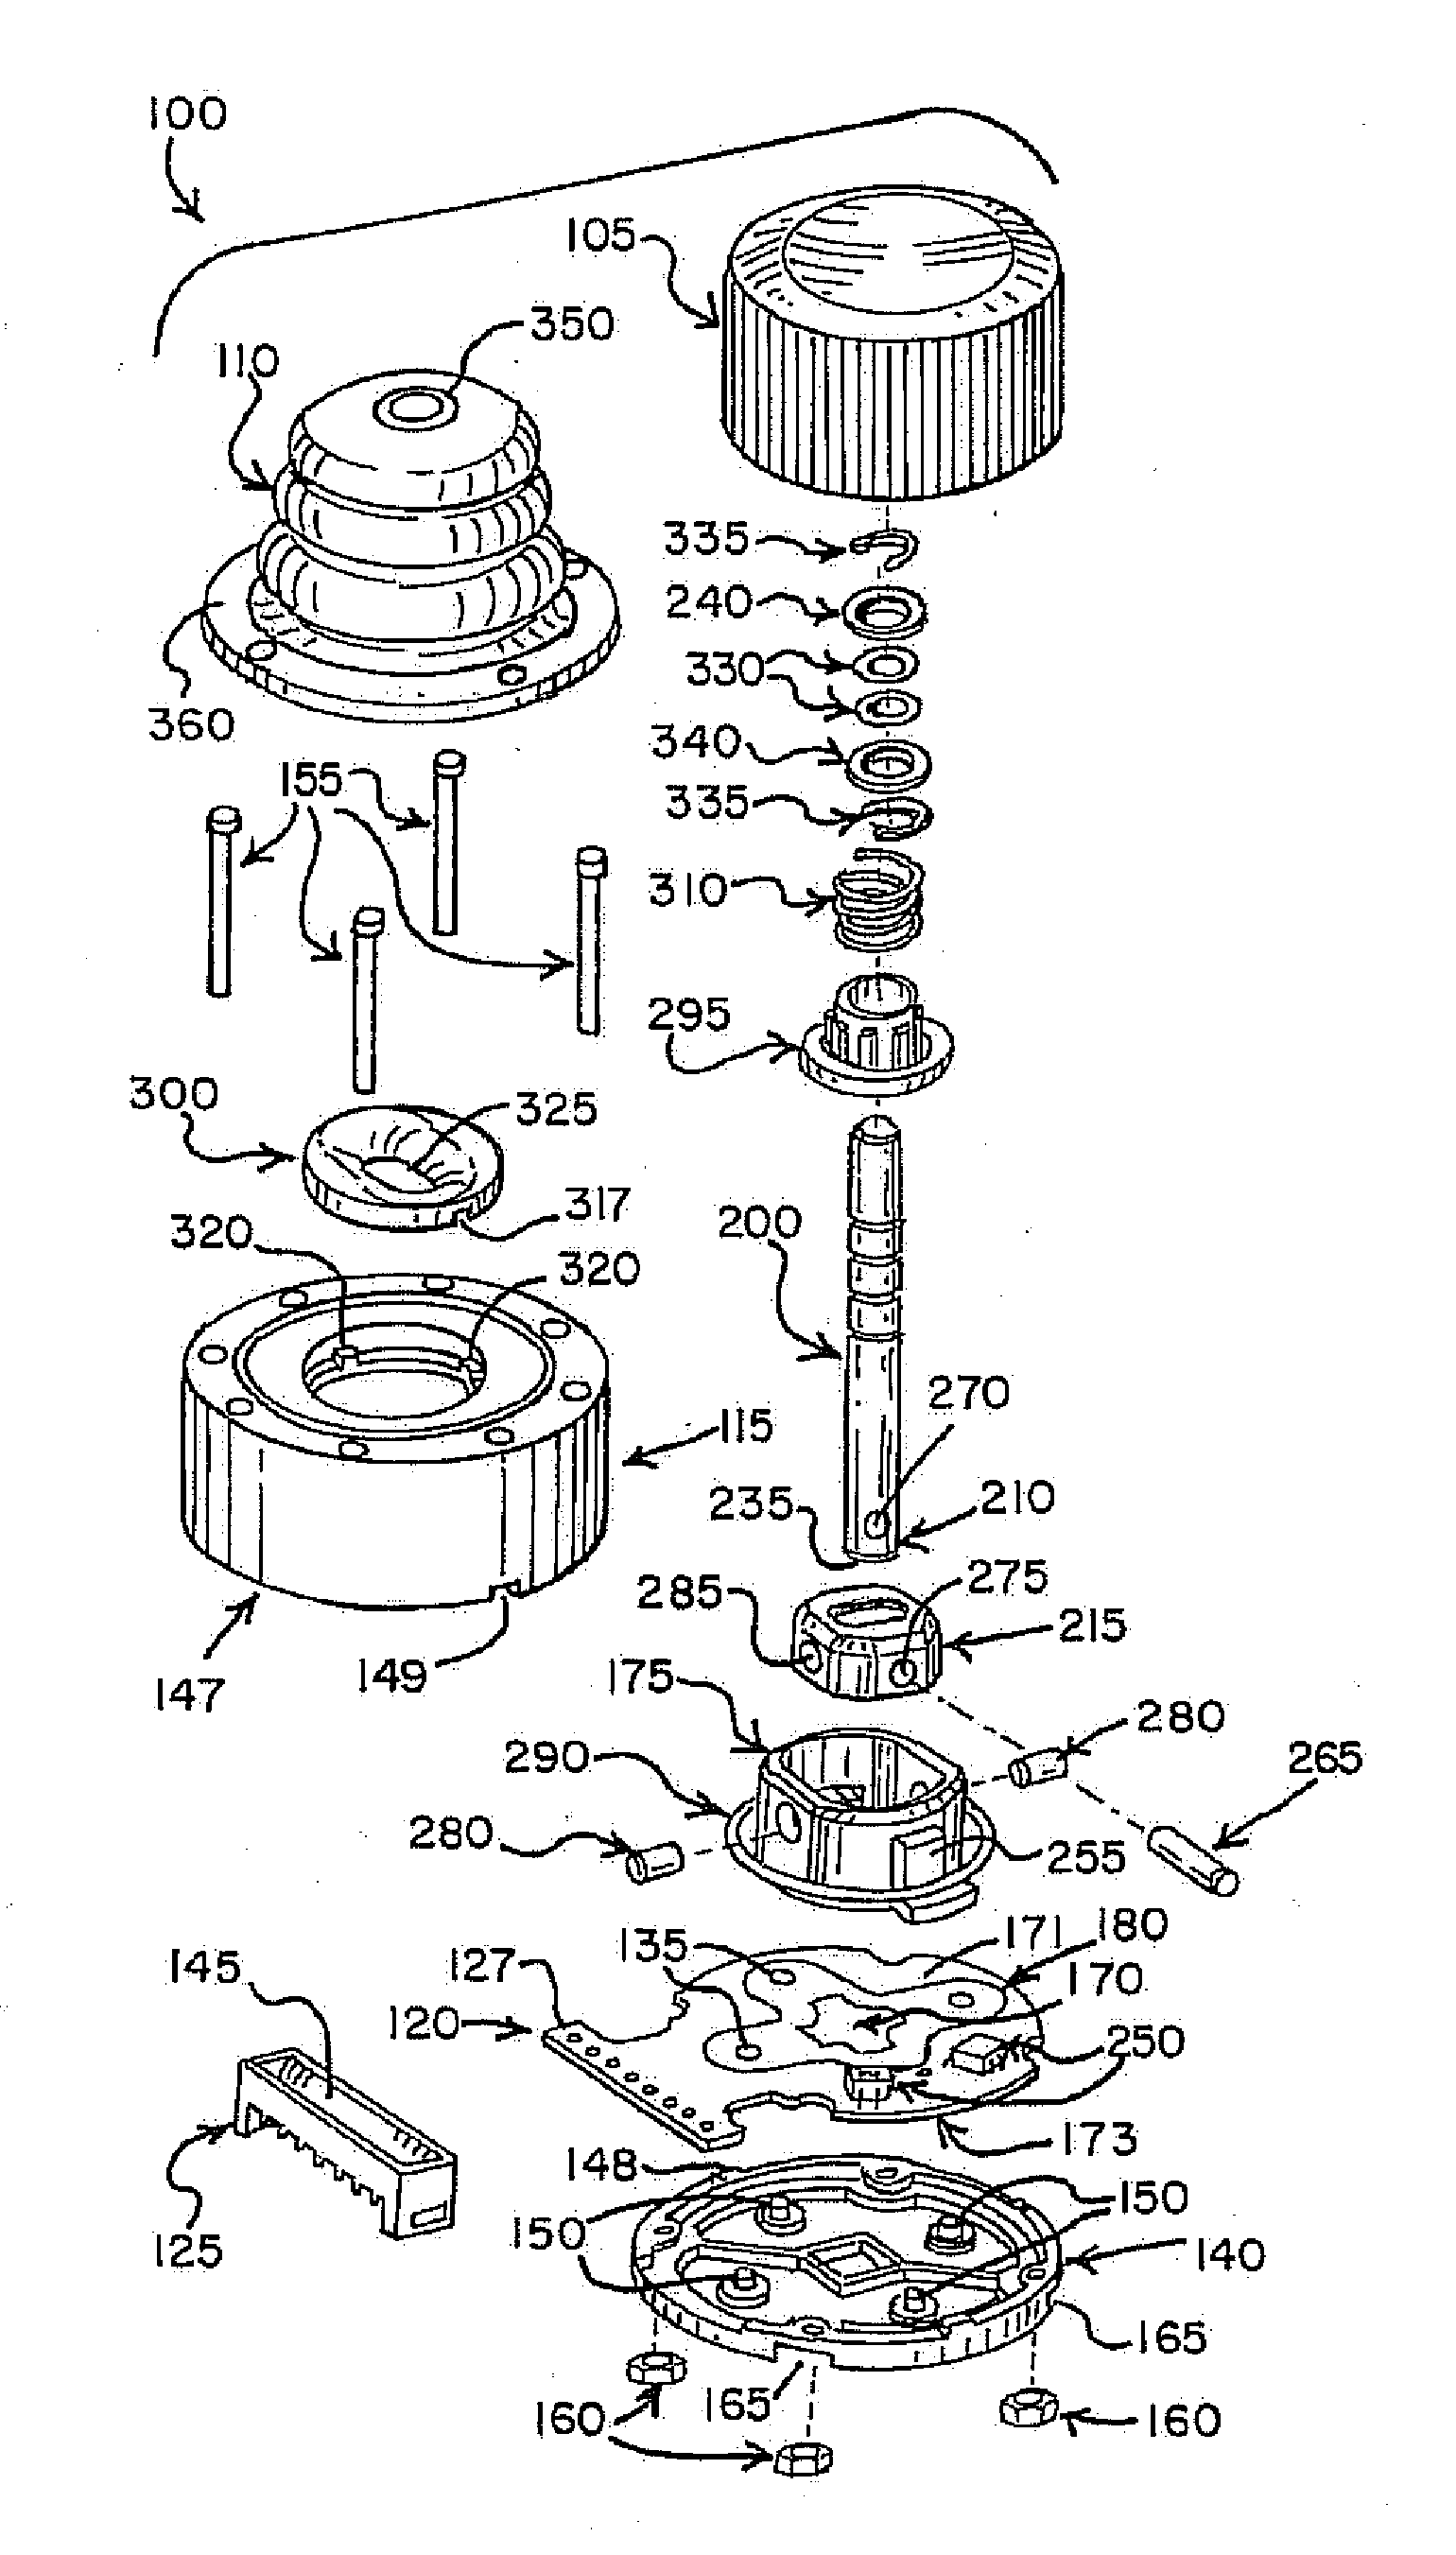 Multifunction joystick apparatus and a method for using same